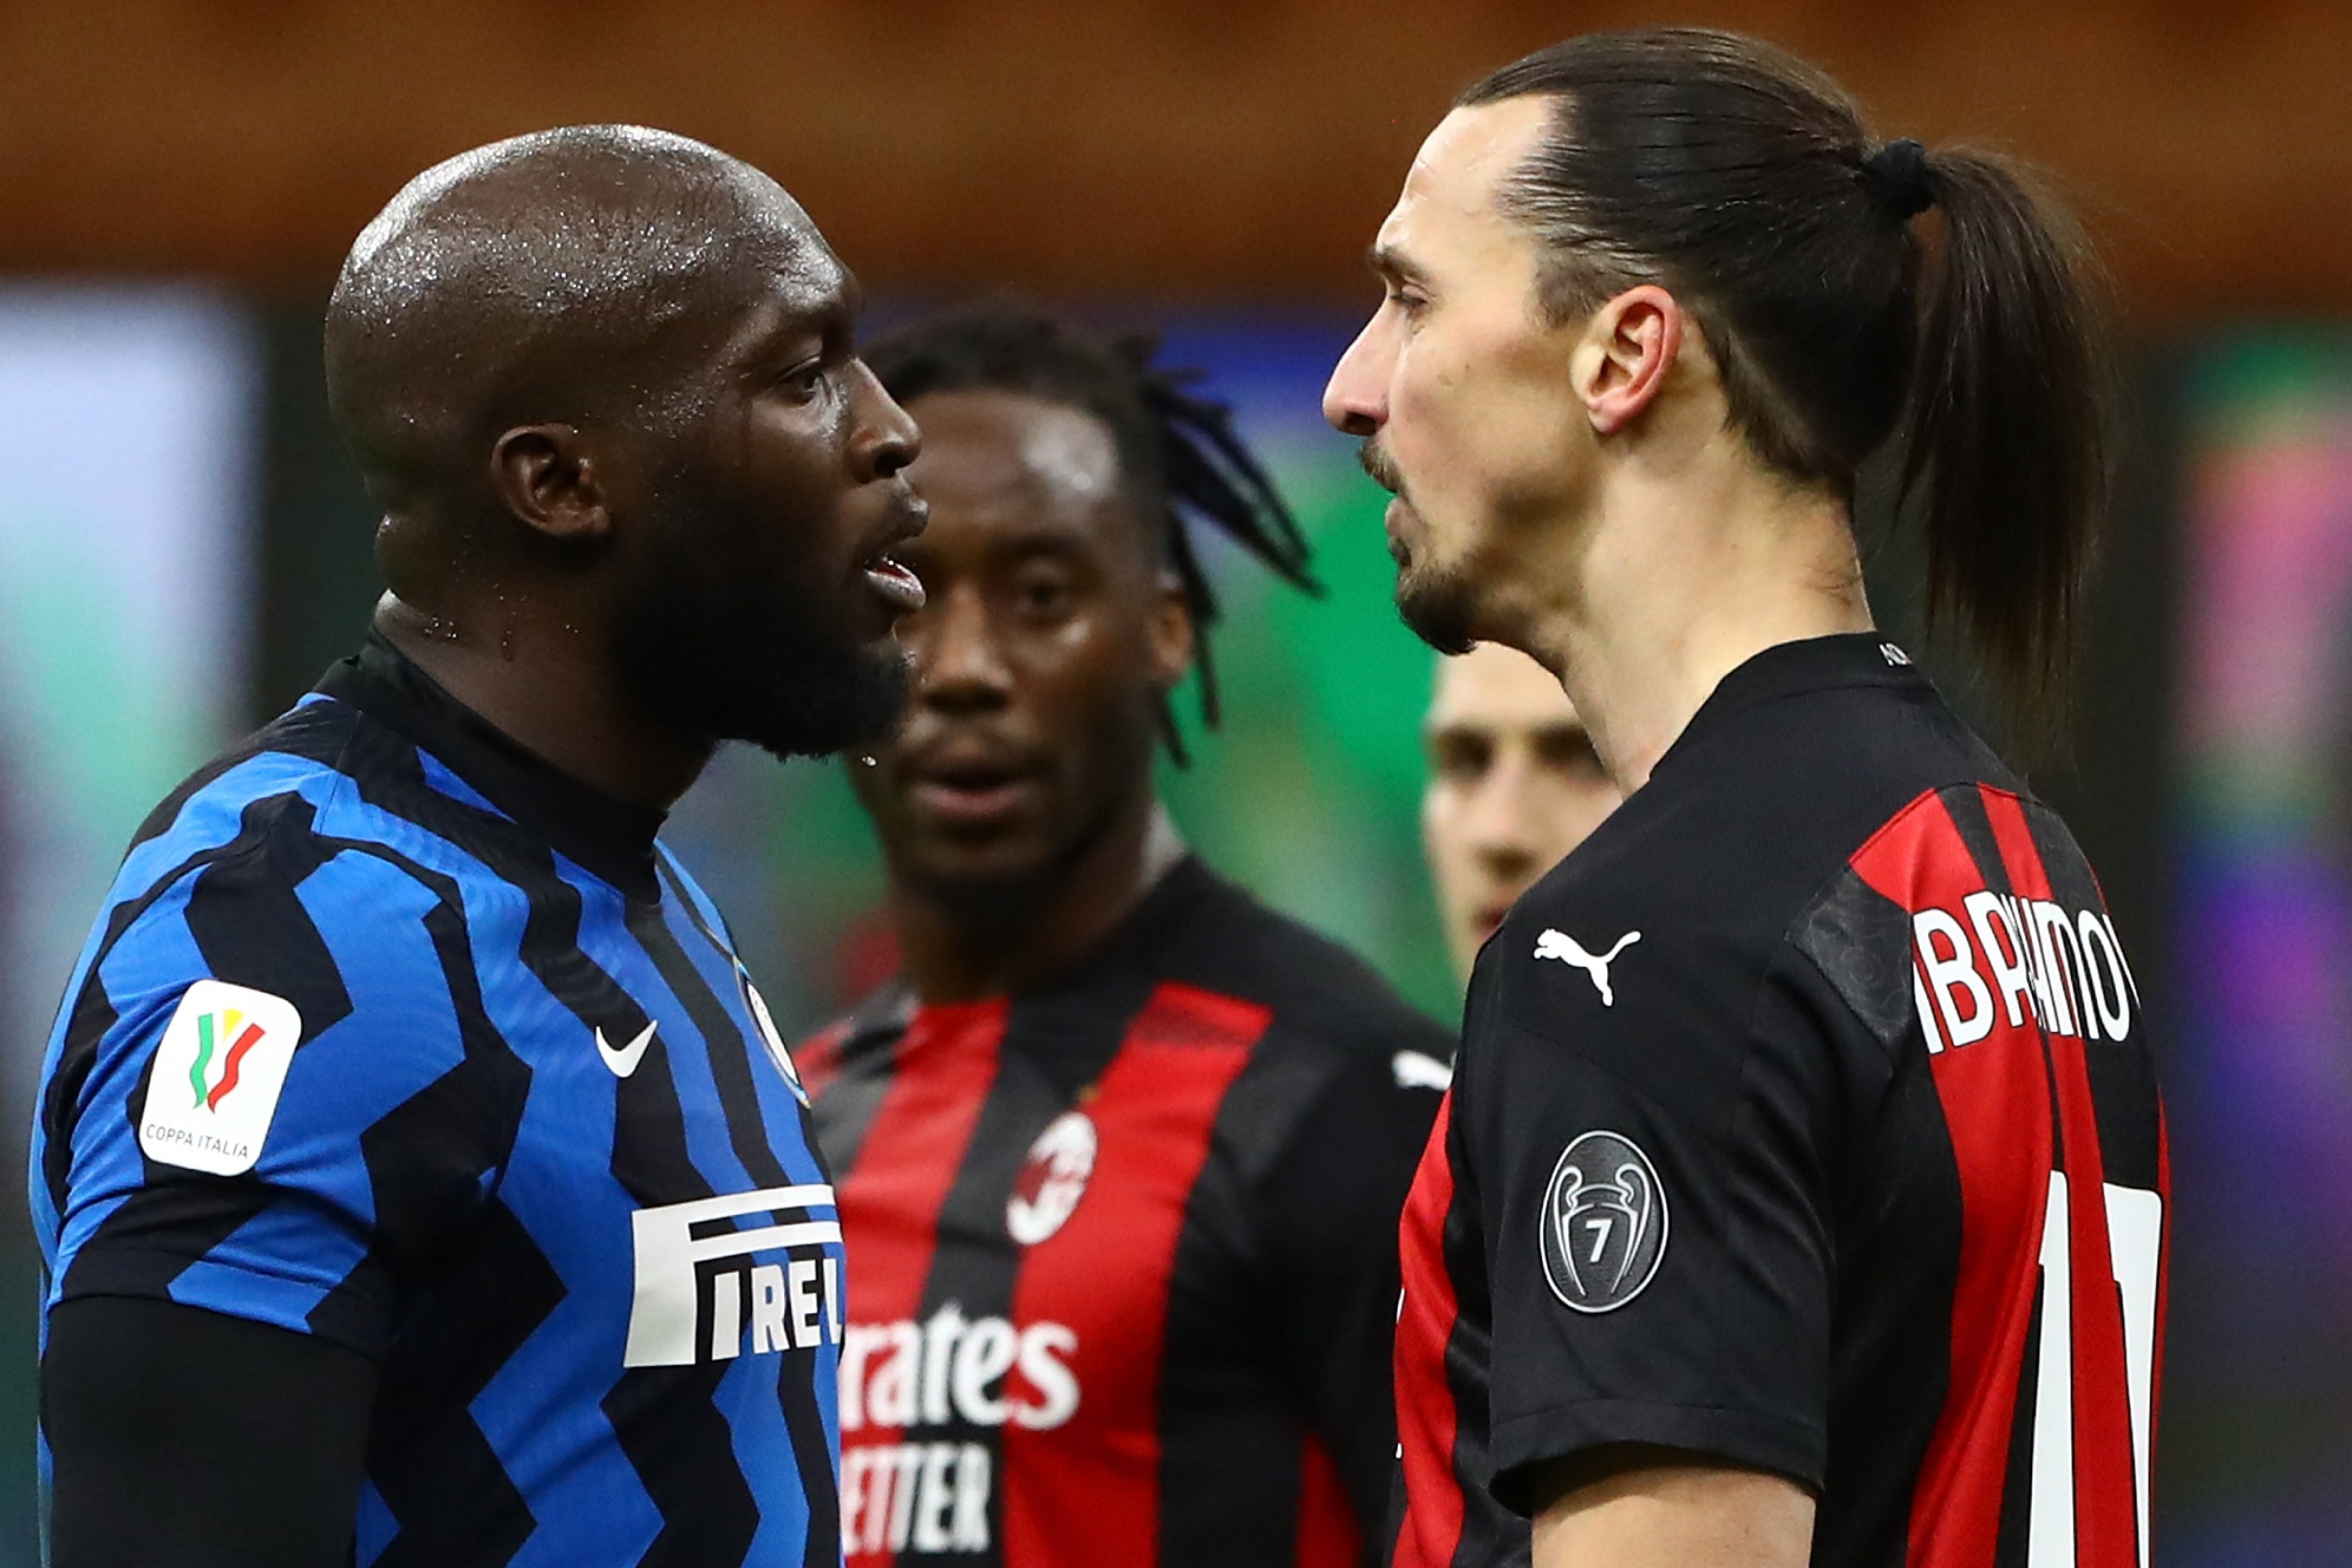 Zlatan Ibrahimovic (R) of AC Milan disputes with Romelu Lukaku (L) of FC Internazionale during the Coppa Italia match between FC Internazionale and AC Milan at Stadio Giuseppe Meazza on January 26, 2021 in Milan, Italy.